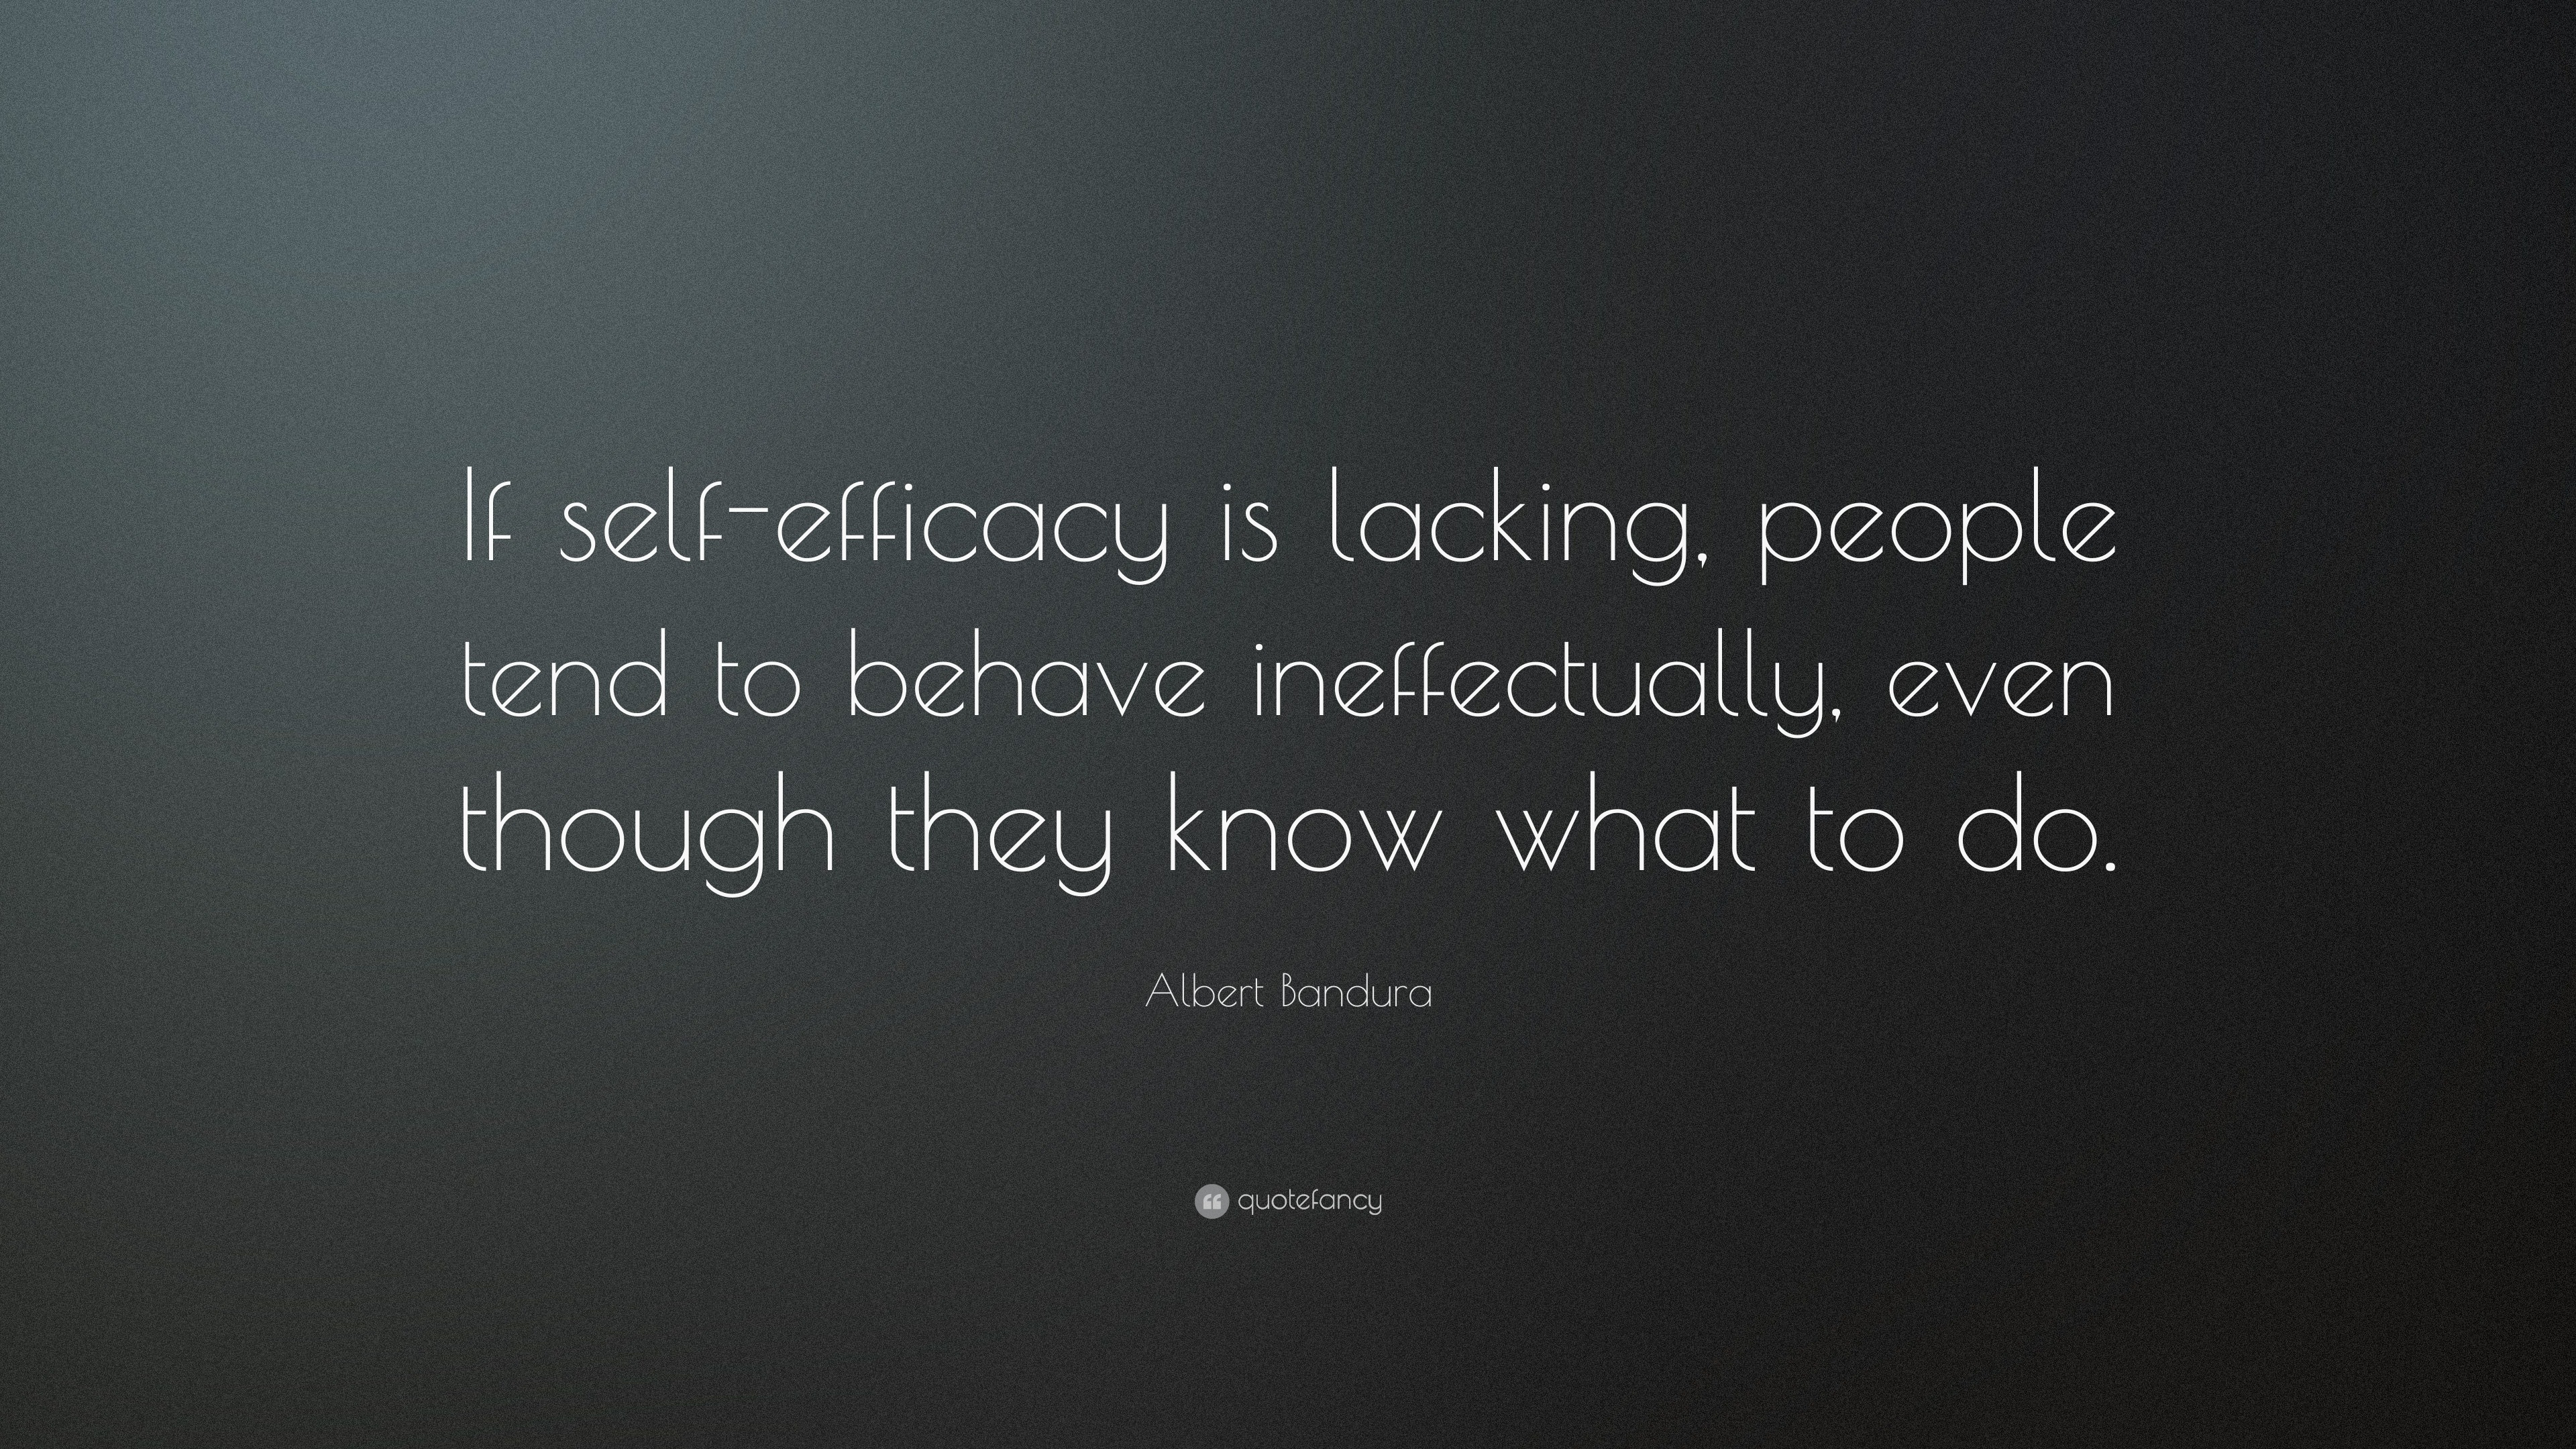 Albert Bandura Quote: “If self-efficacy is lacking, people tend to ...